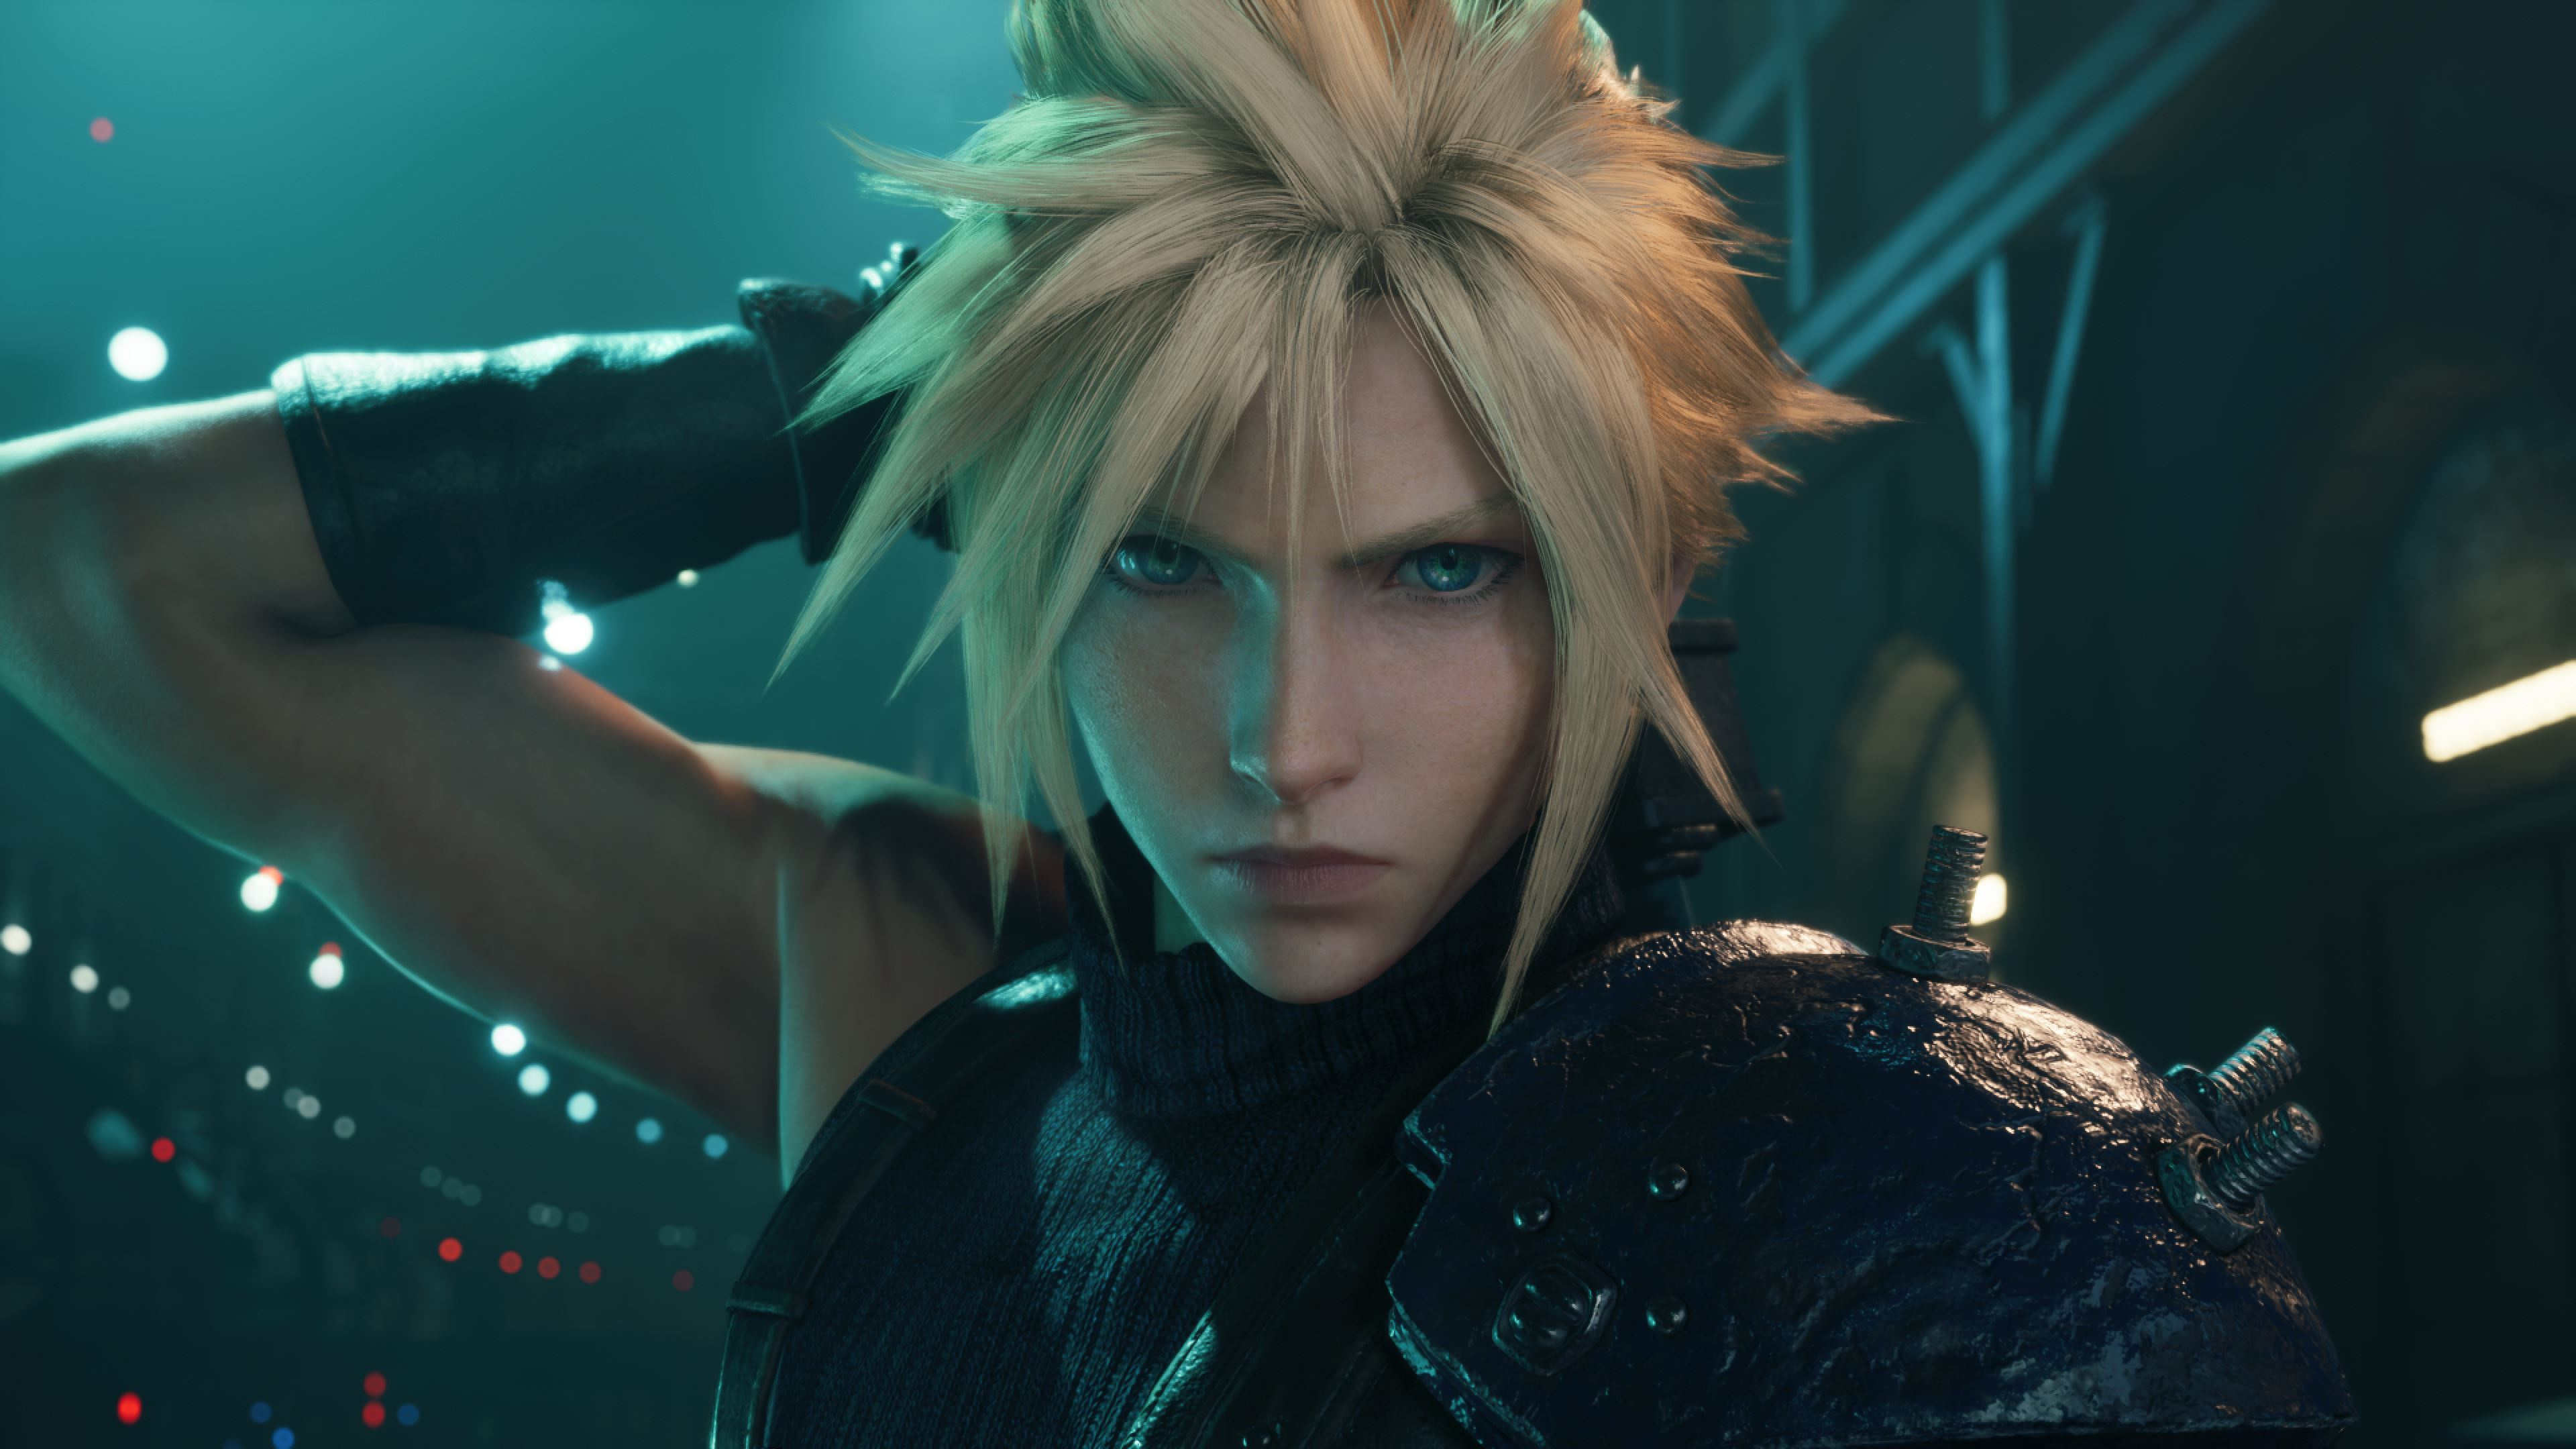  Final Fantasy VII  Remake  Intergrade Is a PS5 Version with 